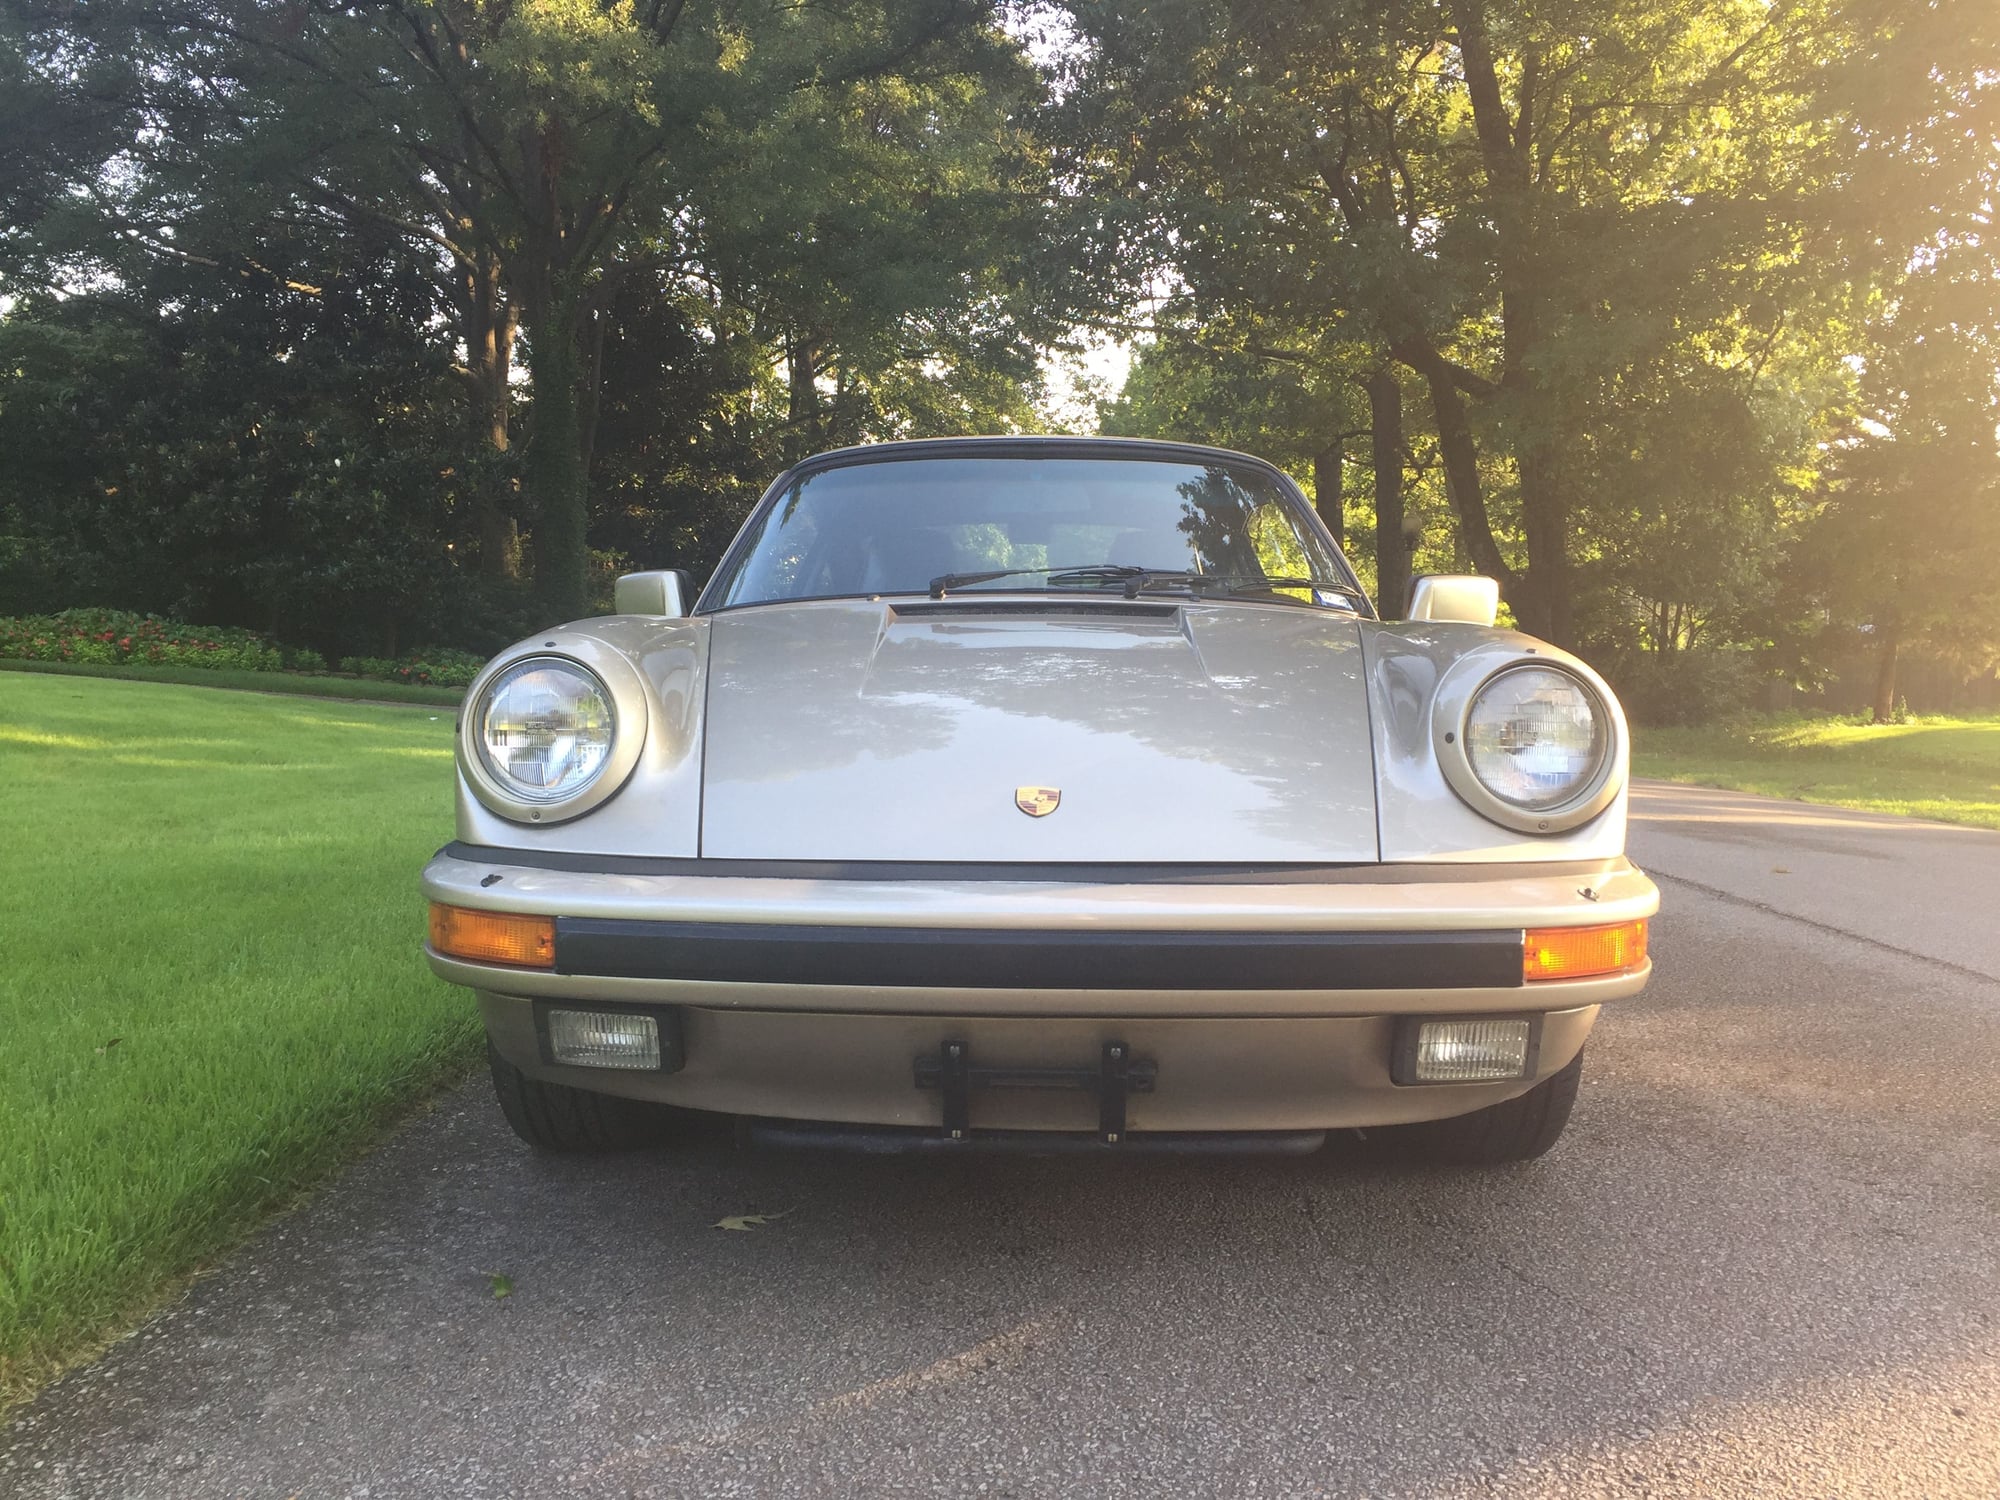 1986 Porsche 911 - 1986 PORSCHE 911 CARRERA COUPE 3.2 Liter ** WHITE GOLD METALLIC - 1 OWNER 30 YEARS ** - Used - VIN WP0AB0919GS121392 - 70,000 Miles - 6 cyl - 2WD - Manual - Coupe - Gold - Memphis, TN 38122, United States